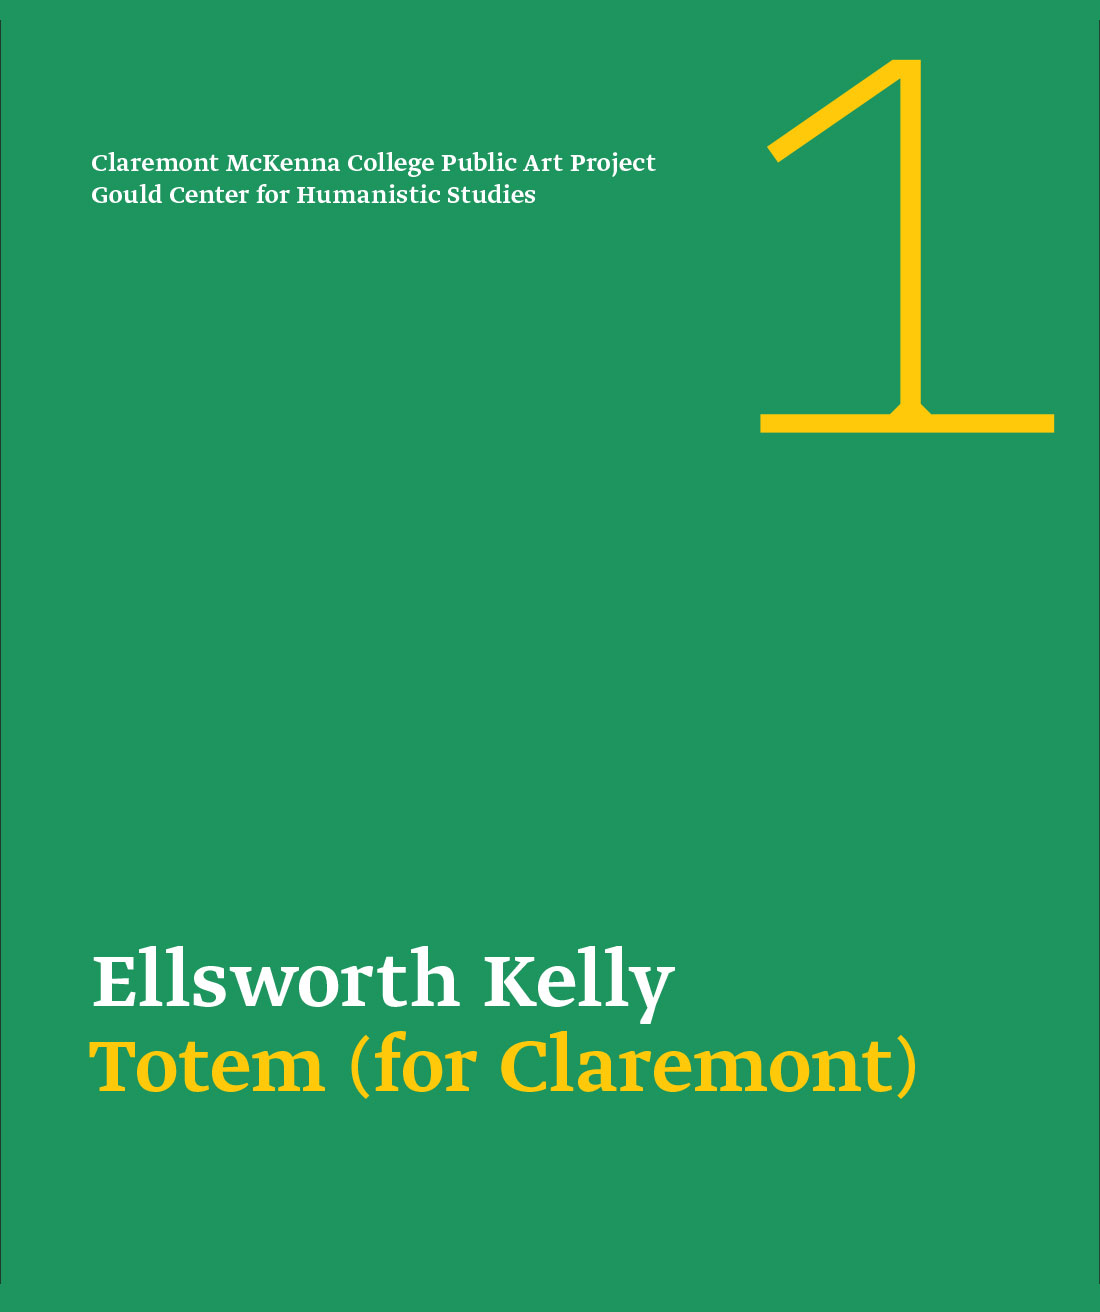 The foreword for Kelly's Totem piece.